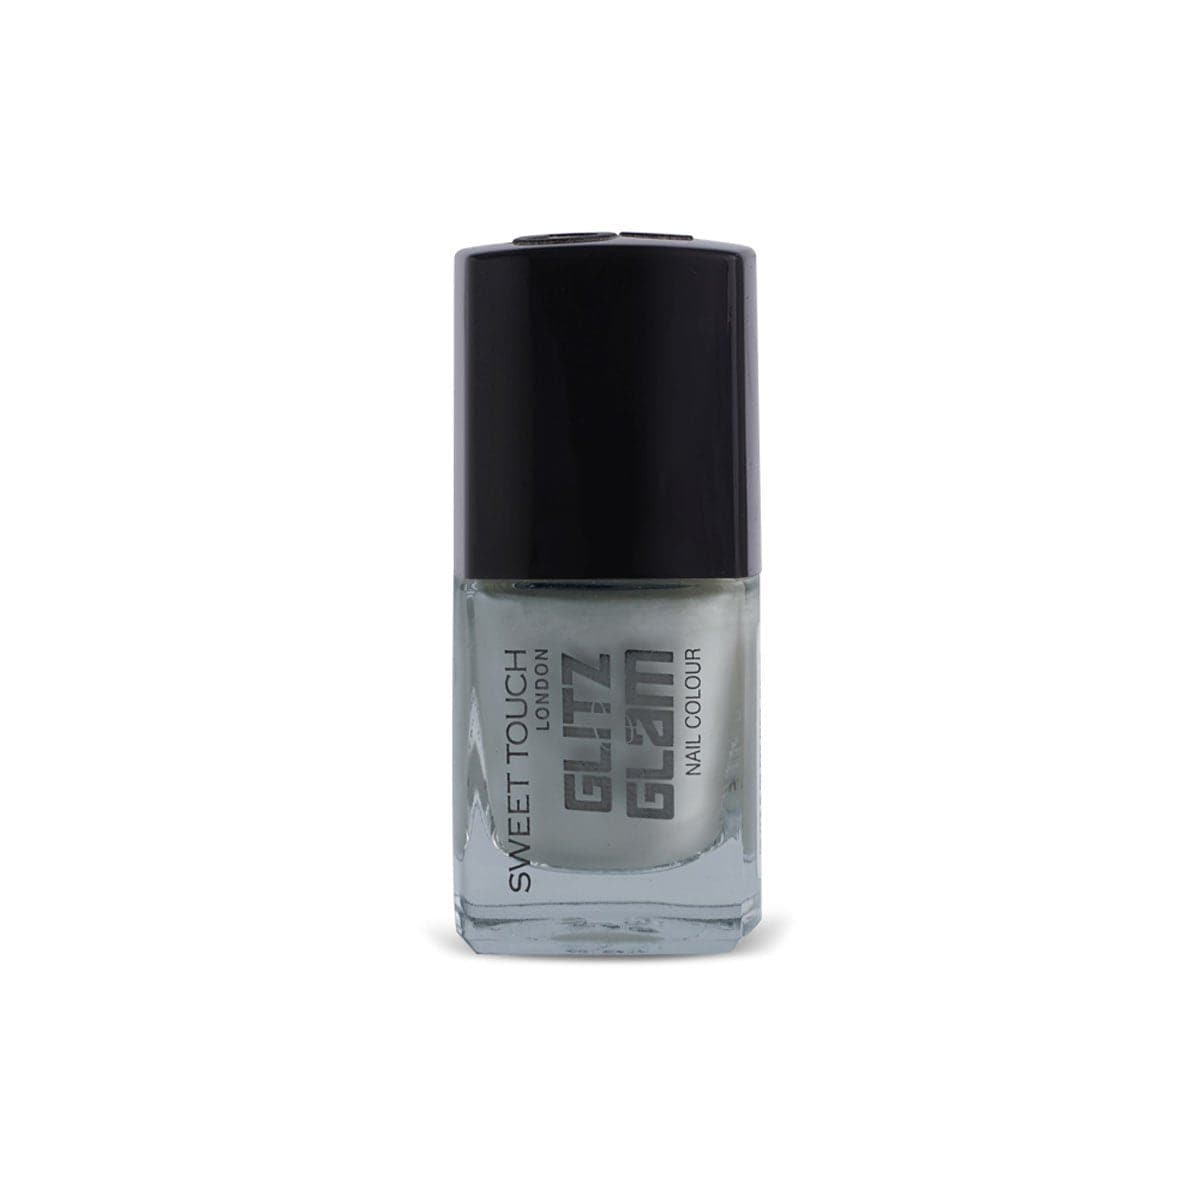 ST London Glitz & Glam Nail Paint - St272 Ice Queen - Premium Health & Beauty from St London - Just Rs 430.00! Shop now at Cozmetica